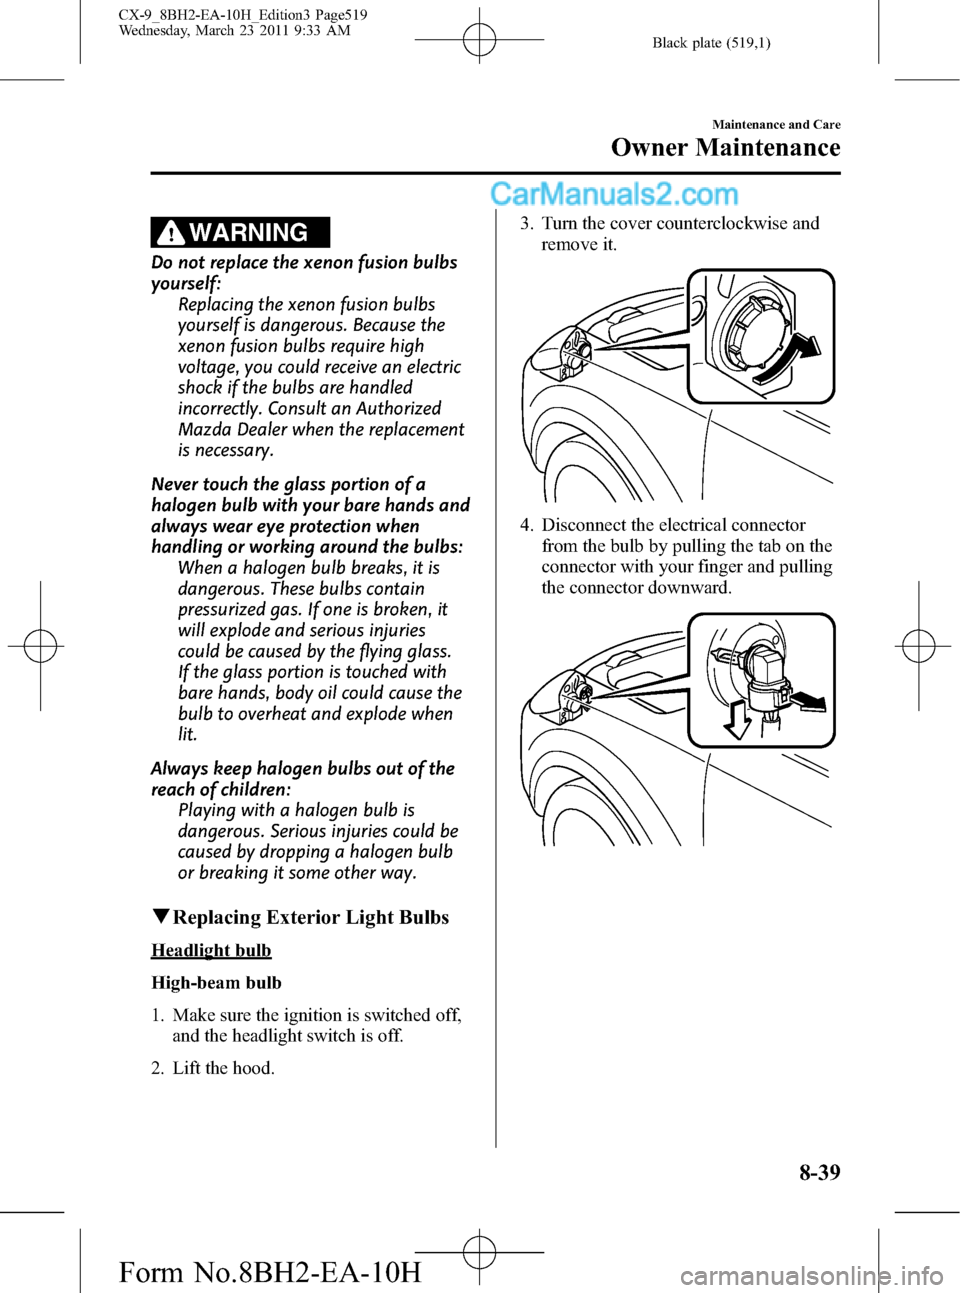 MAZDA MODEL CX-9 2011  Owners Manual (in English) Black plate (519,1)
WARNING
Do not replace the xenon fusion bulbs
yourself:
Replacing the xenon fusion bulbs
yourself is dangerous. Because the
xenon fusion bulbs require high
voltage, you could recei